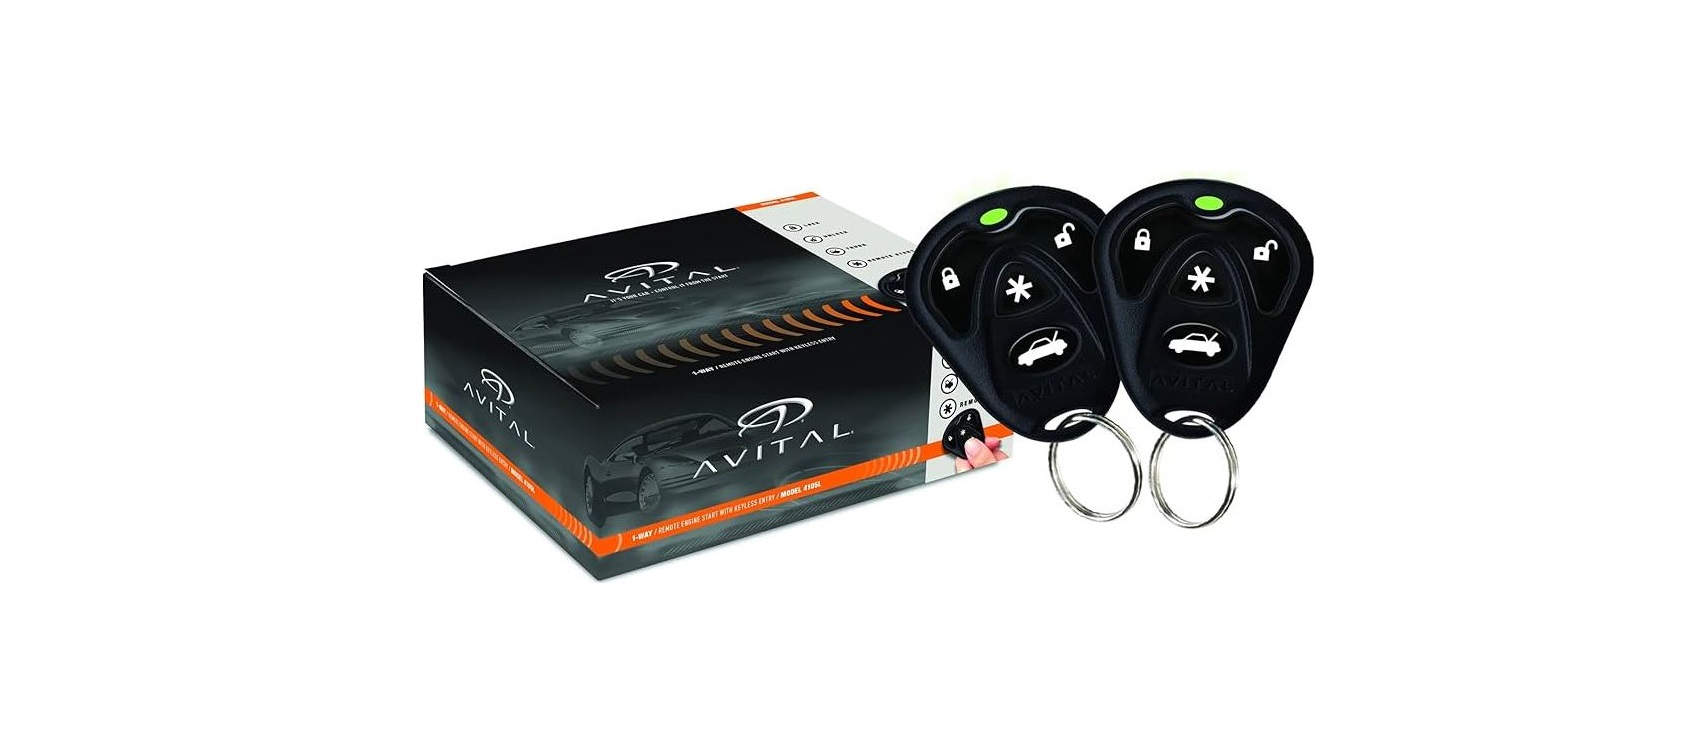 Aital 4105L 1-Way Remote Start System feature